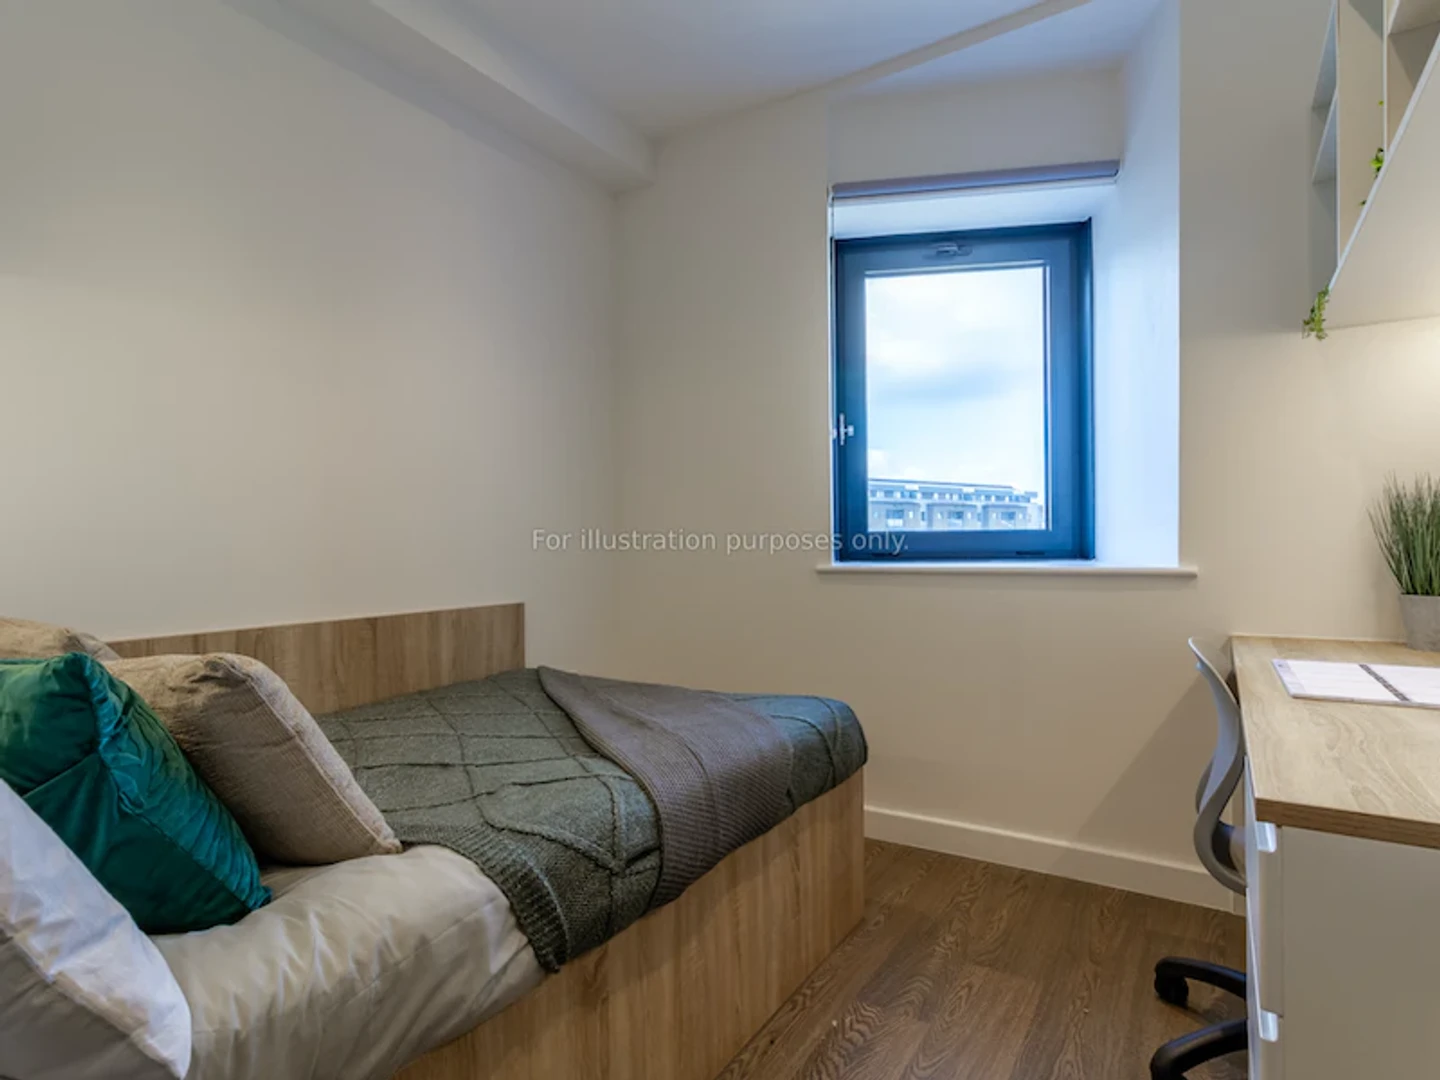 Cheap private room in Plymouth